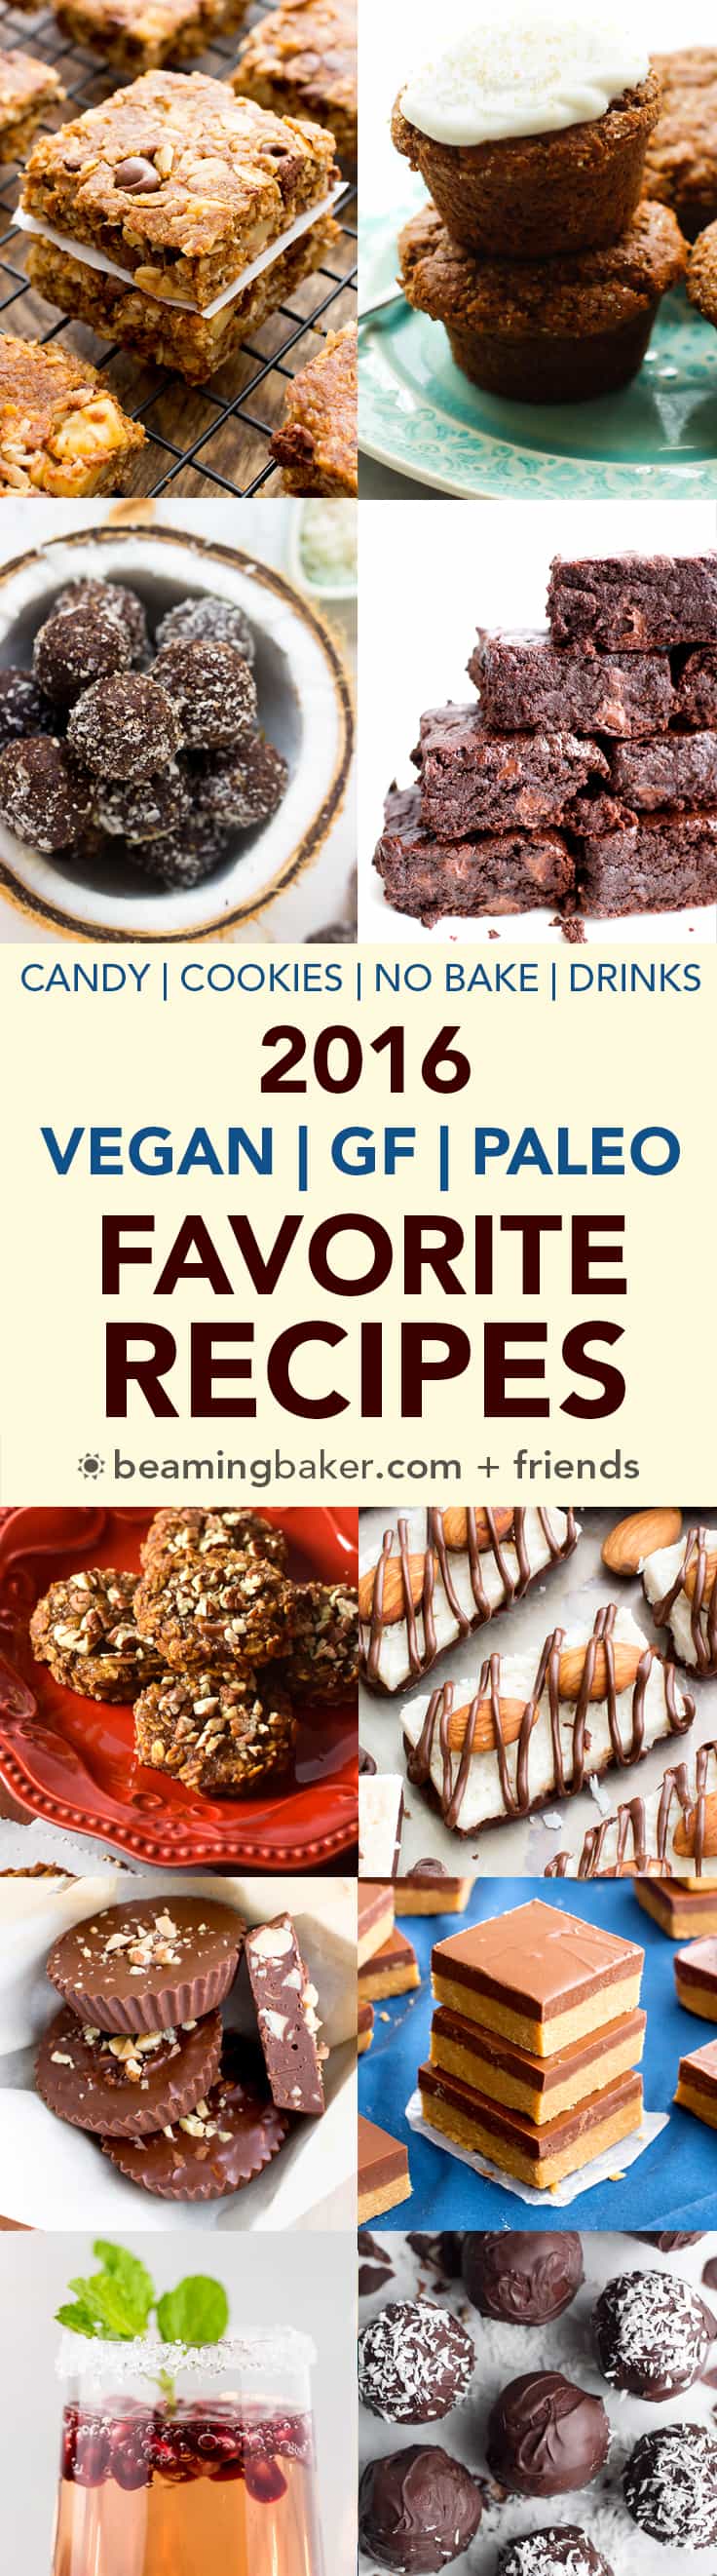 My Favorite Recipes of 2016: a collection of my favorite recipes, featuring gluten free, paleo, vegan and dairy-free treats from Beaming Baker and around the web. #Vegan #GlutenFree #Paleo #DairyFree | BeamingBaker.com